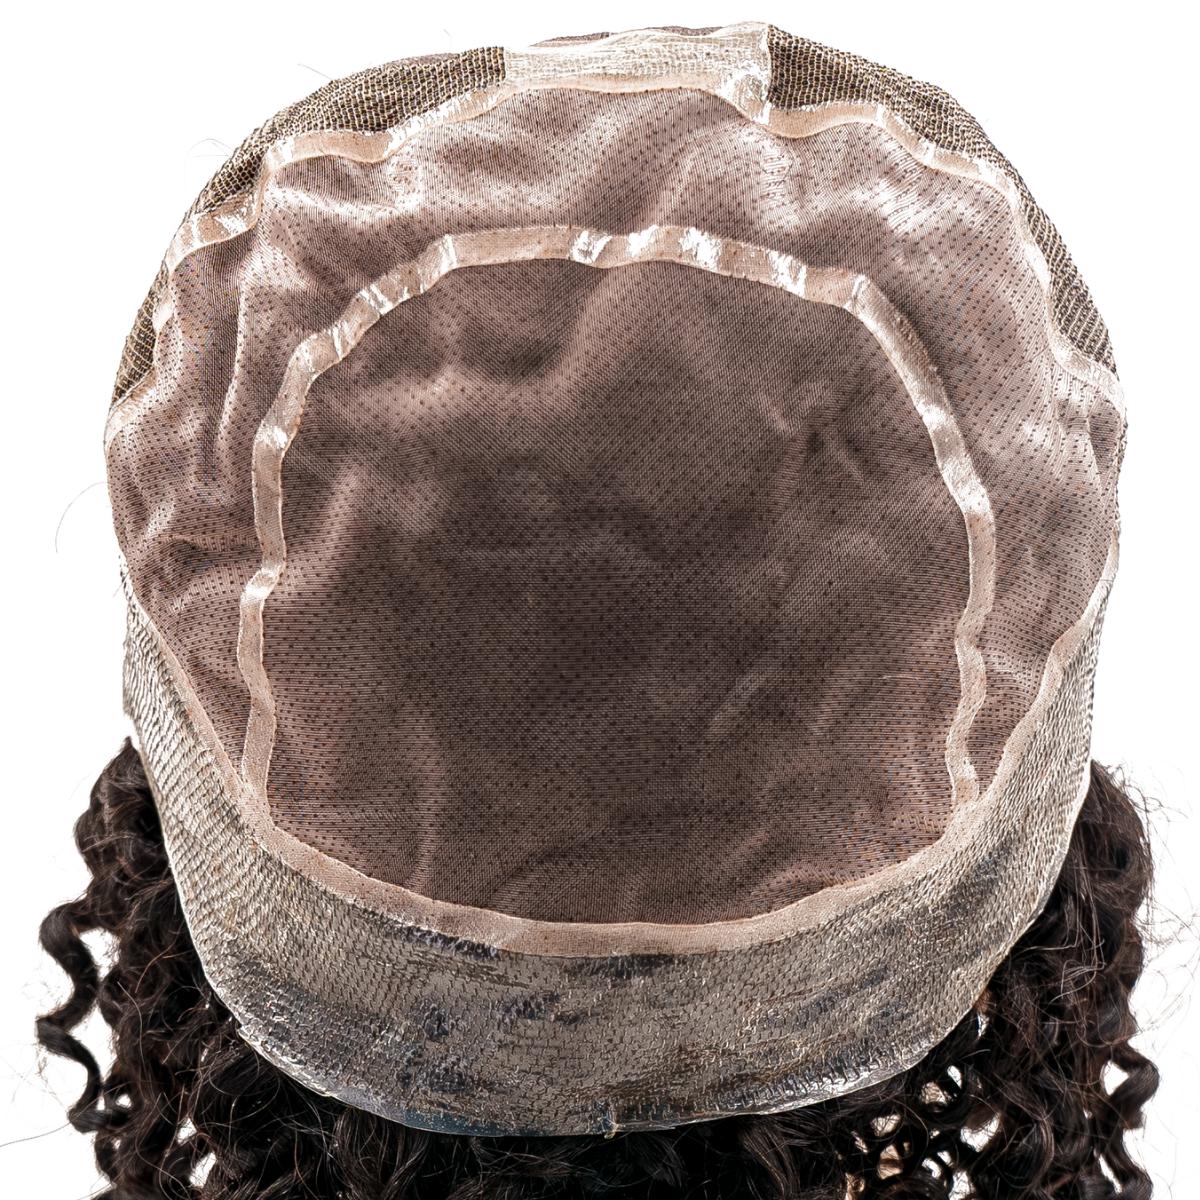 curly Fine mono base french lace medical wig cap